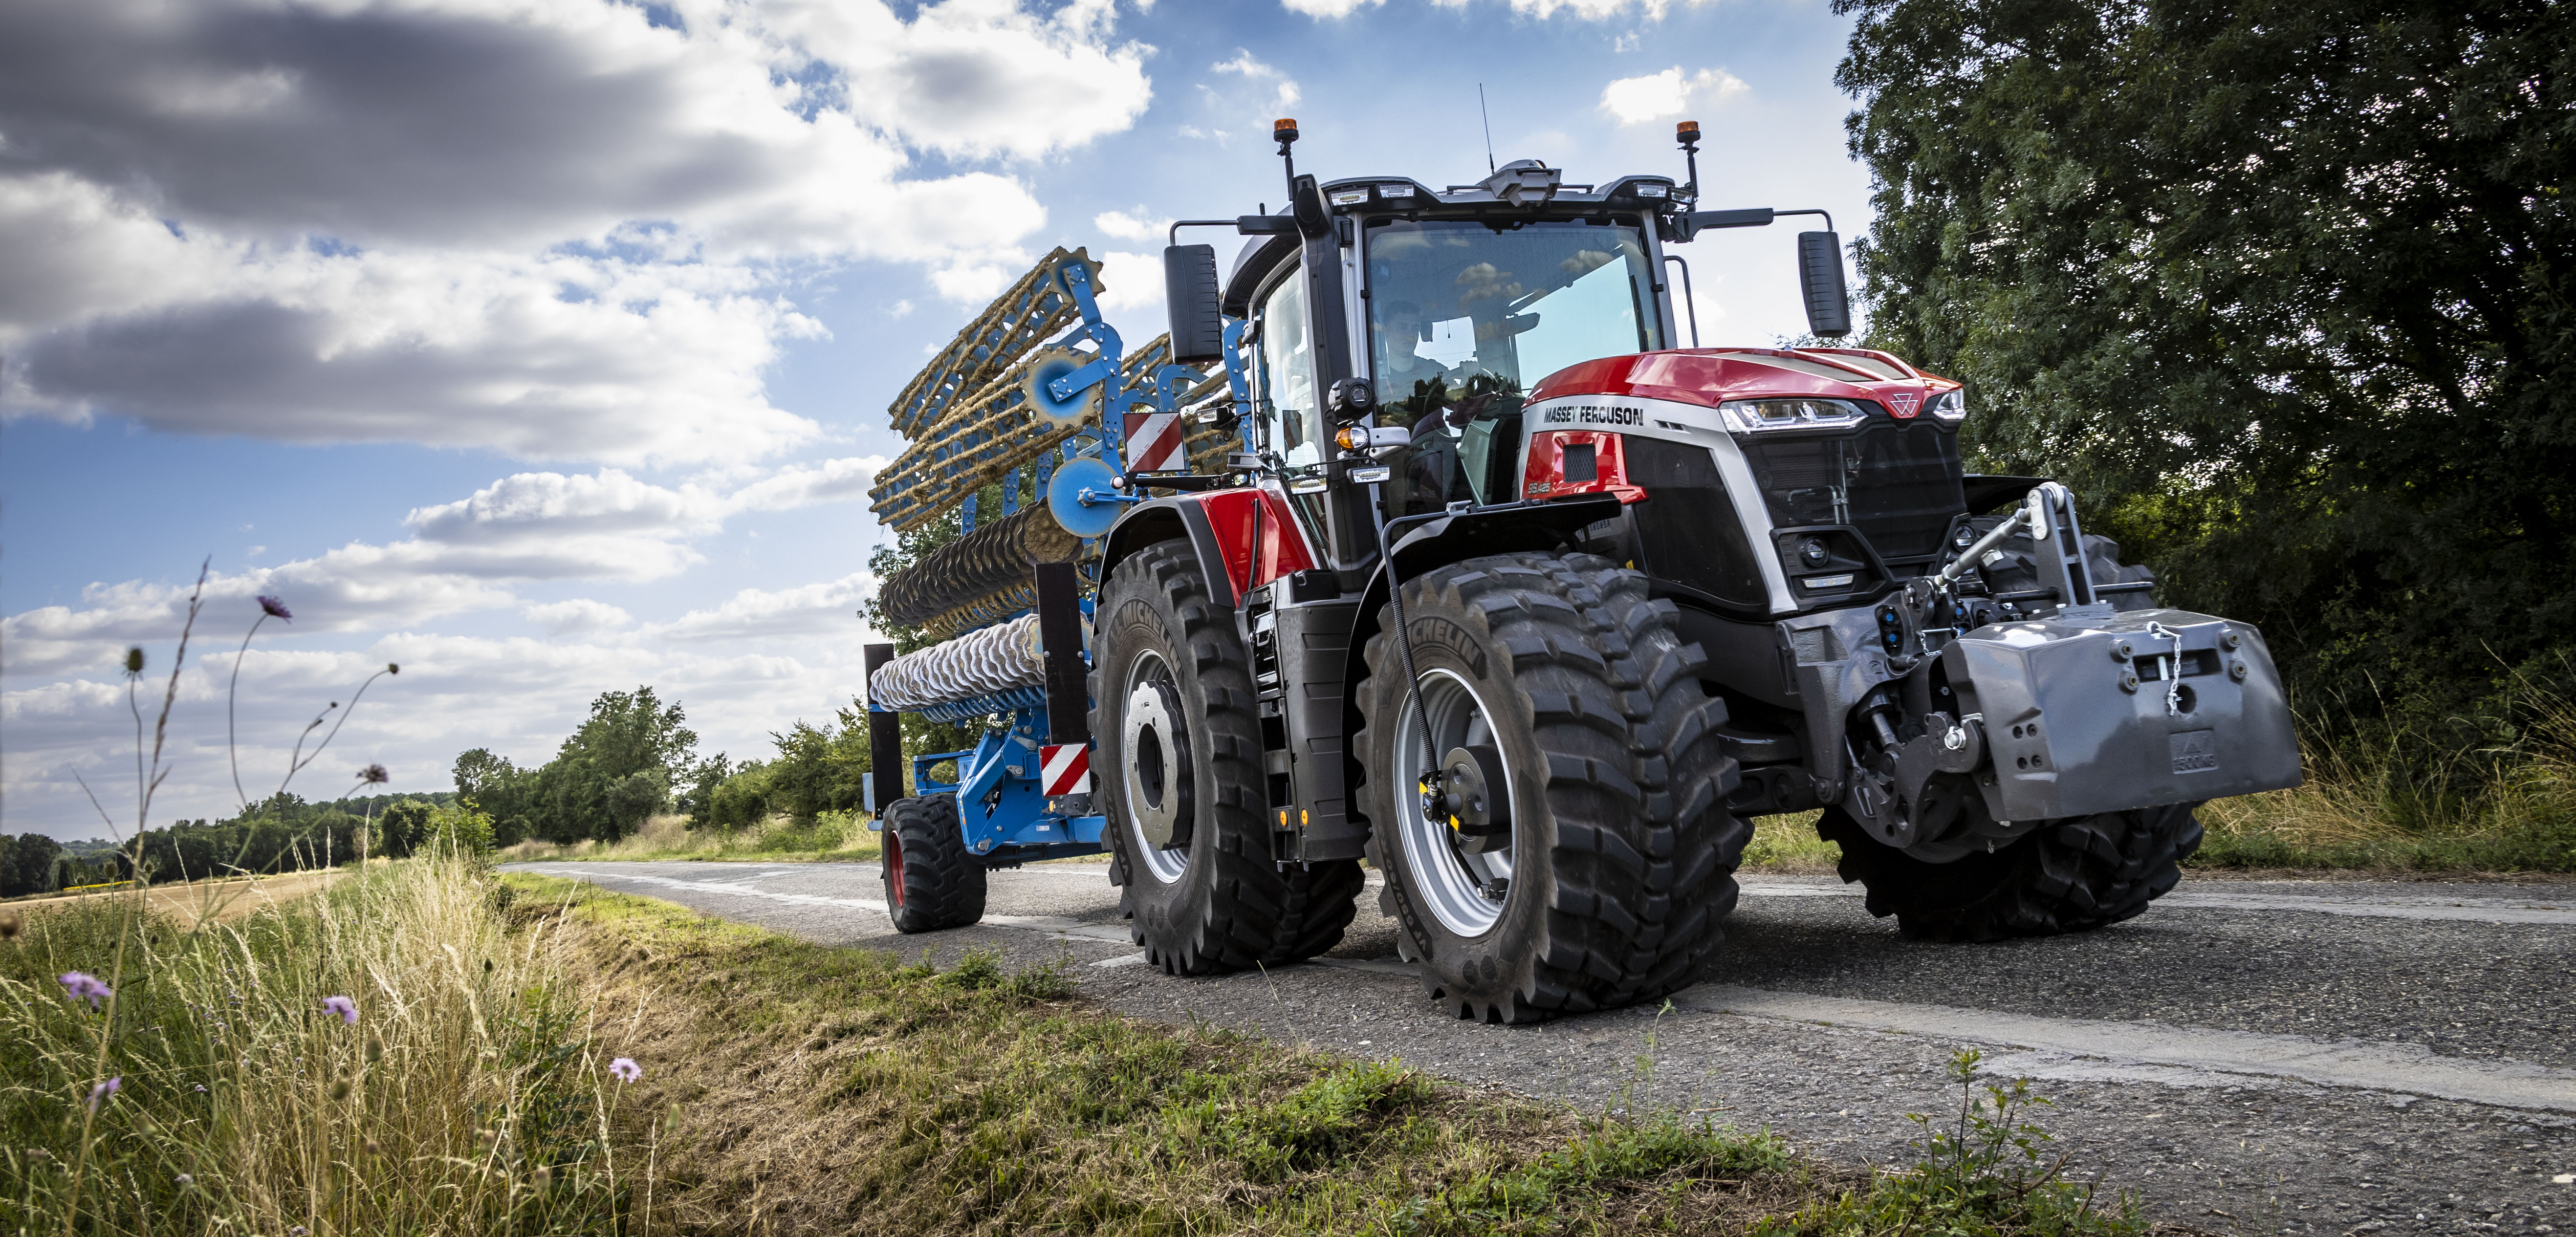  Massey Ferguson’s flagship MF 9S has scooped two awards  at the Techagro show in Brno, Czech Republic.